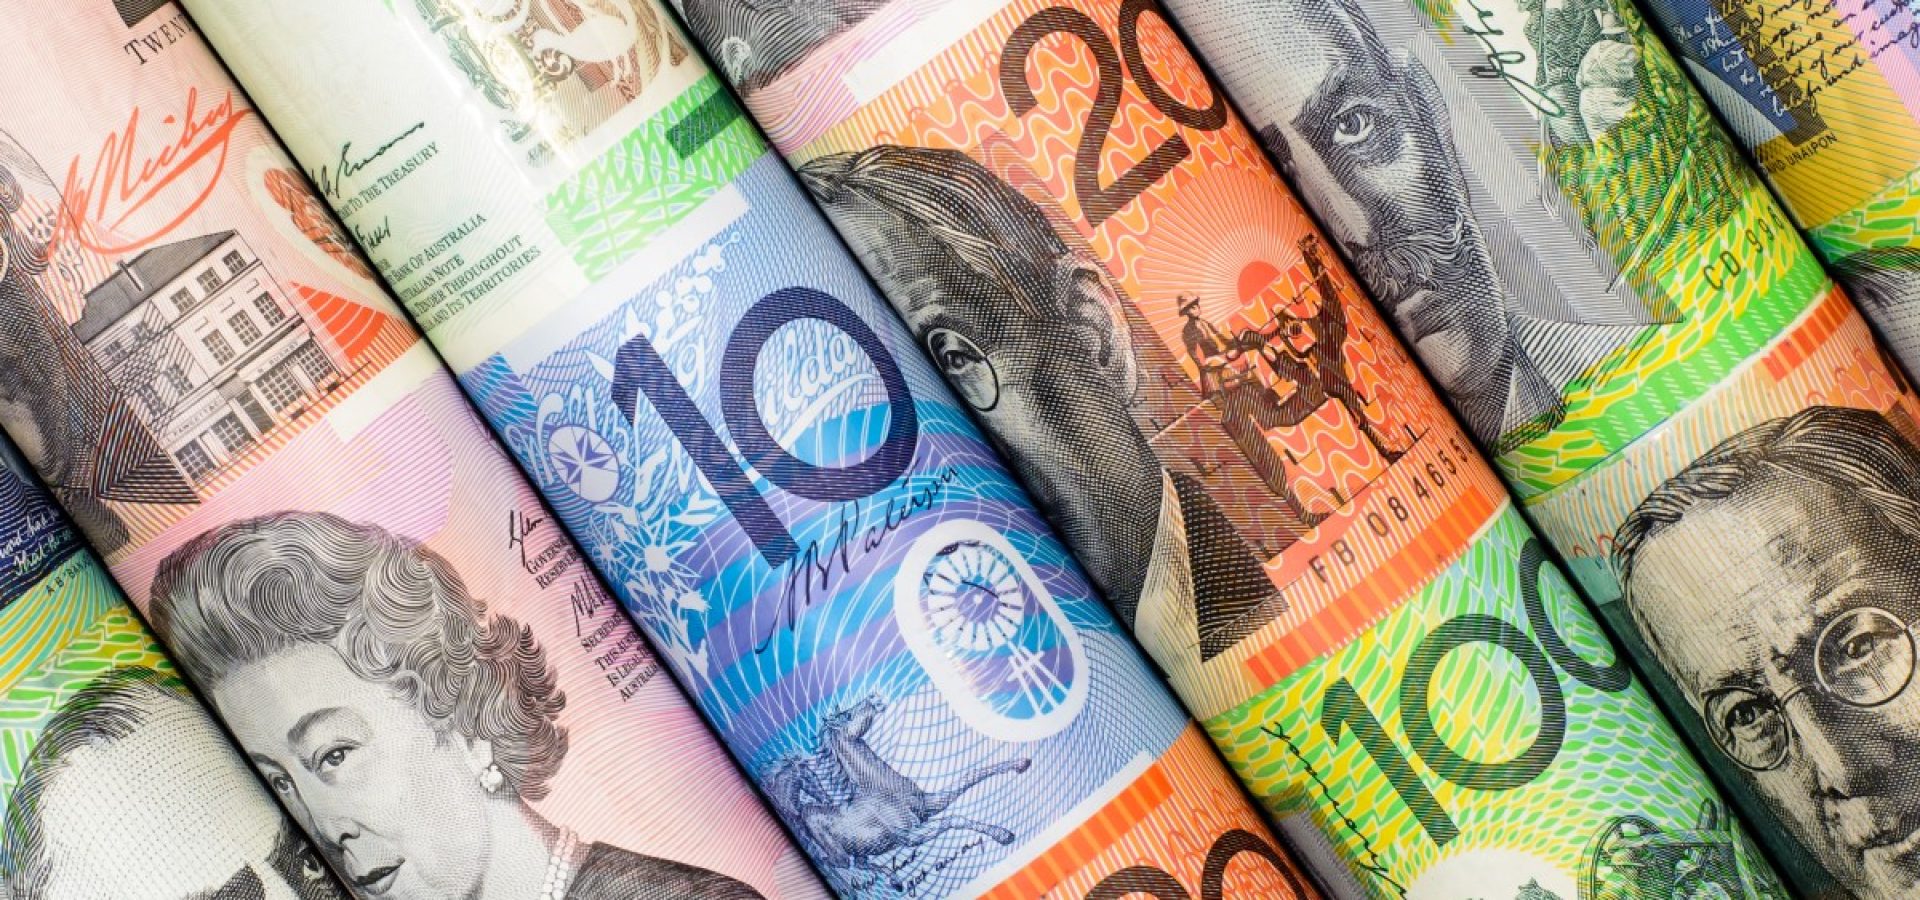 AUD - Dollar, Economy and First recession in nearly 30 years